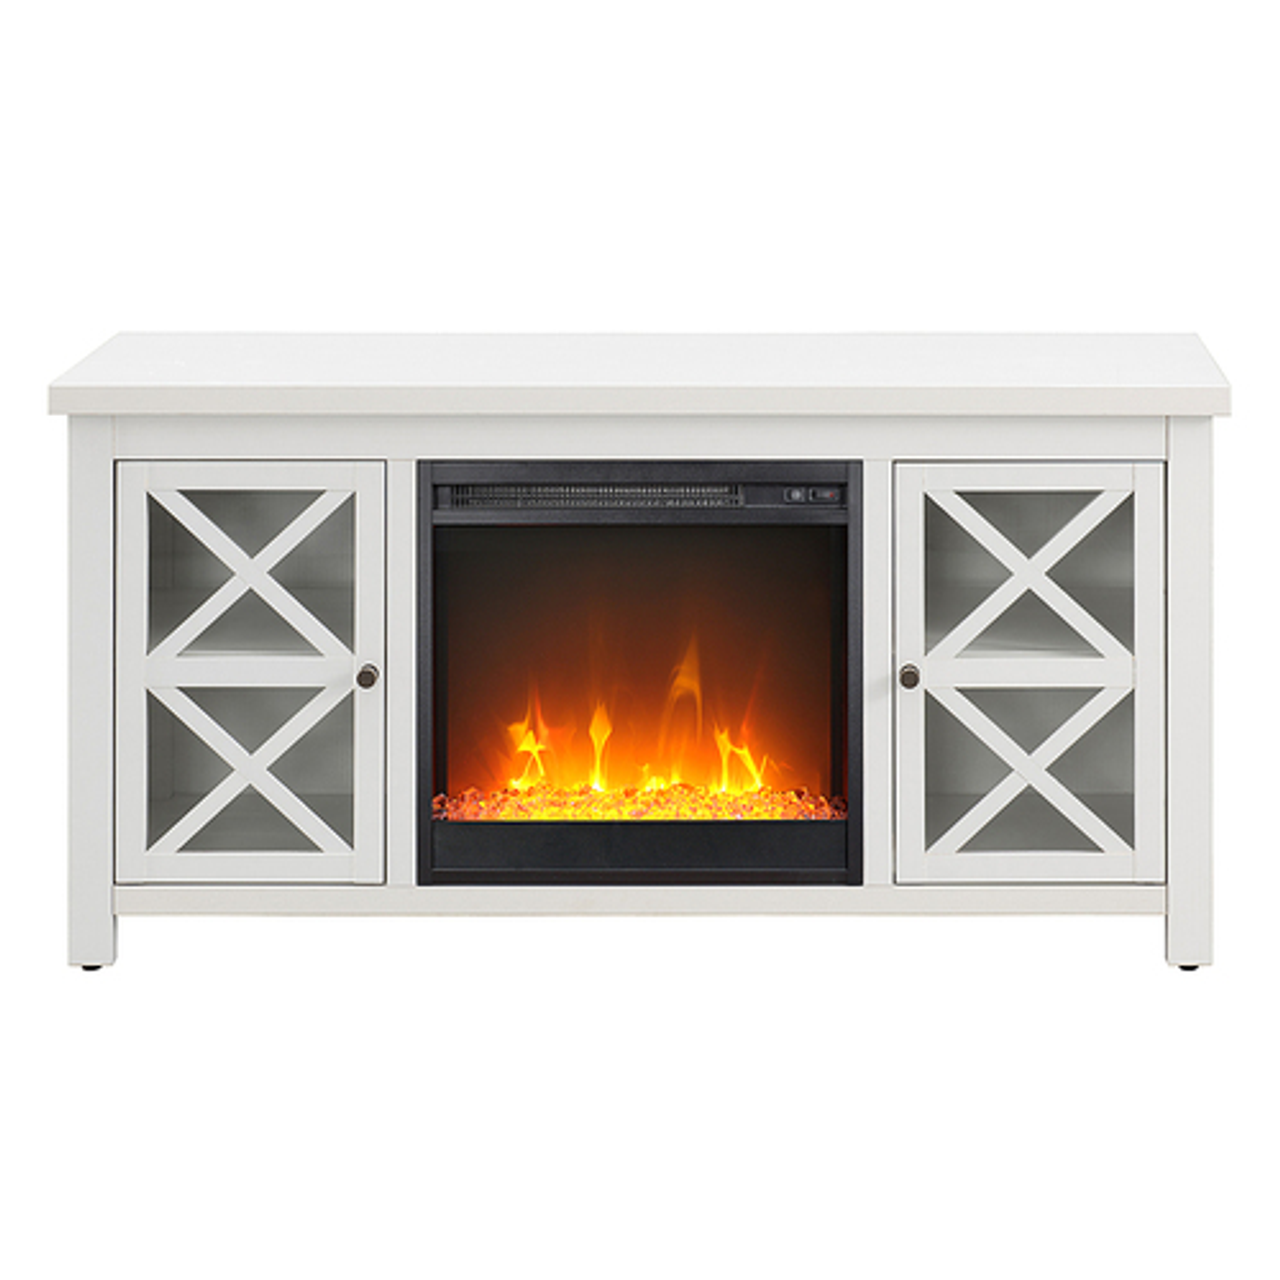 Camden&Wells - Colton 47.75" TV Stand with Crystal Fireplace - White